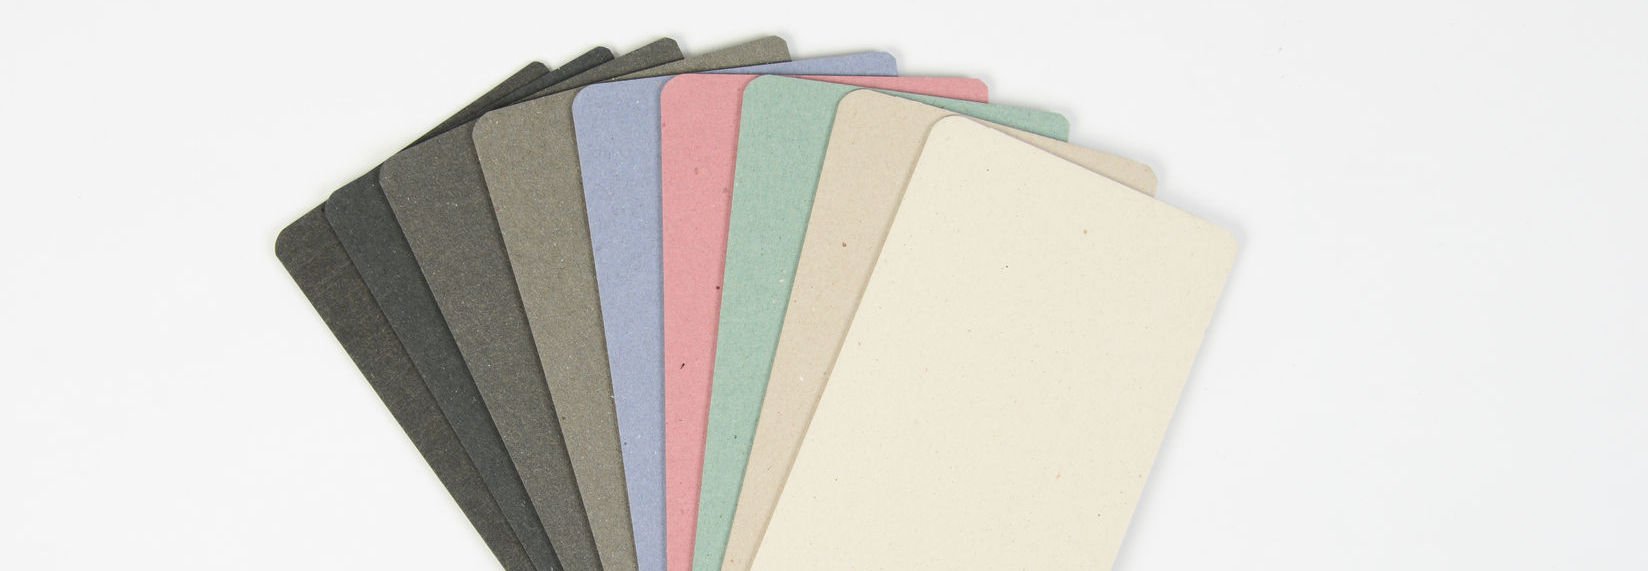 MERCKENS | Merckens from Austria produces coloured cardboard with the same mechanical properties as standard greys.